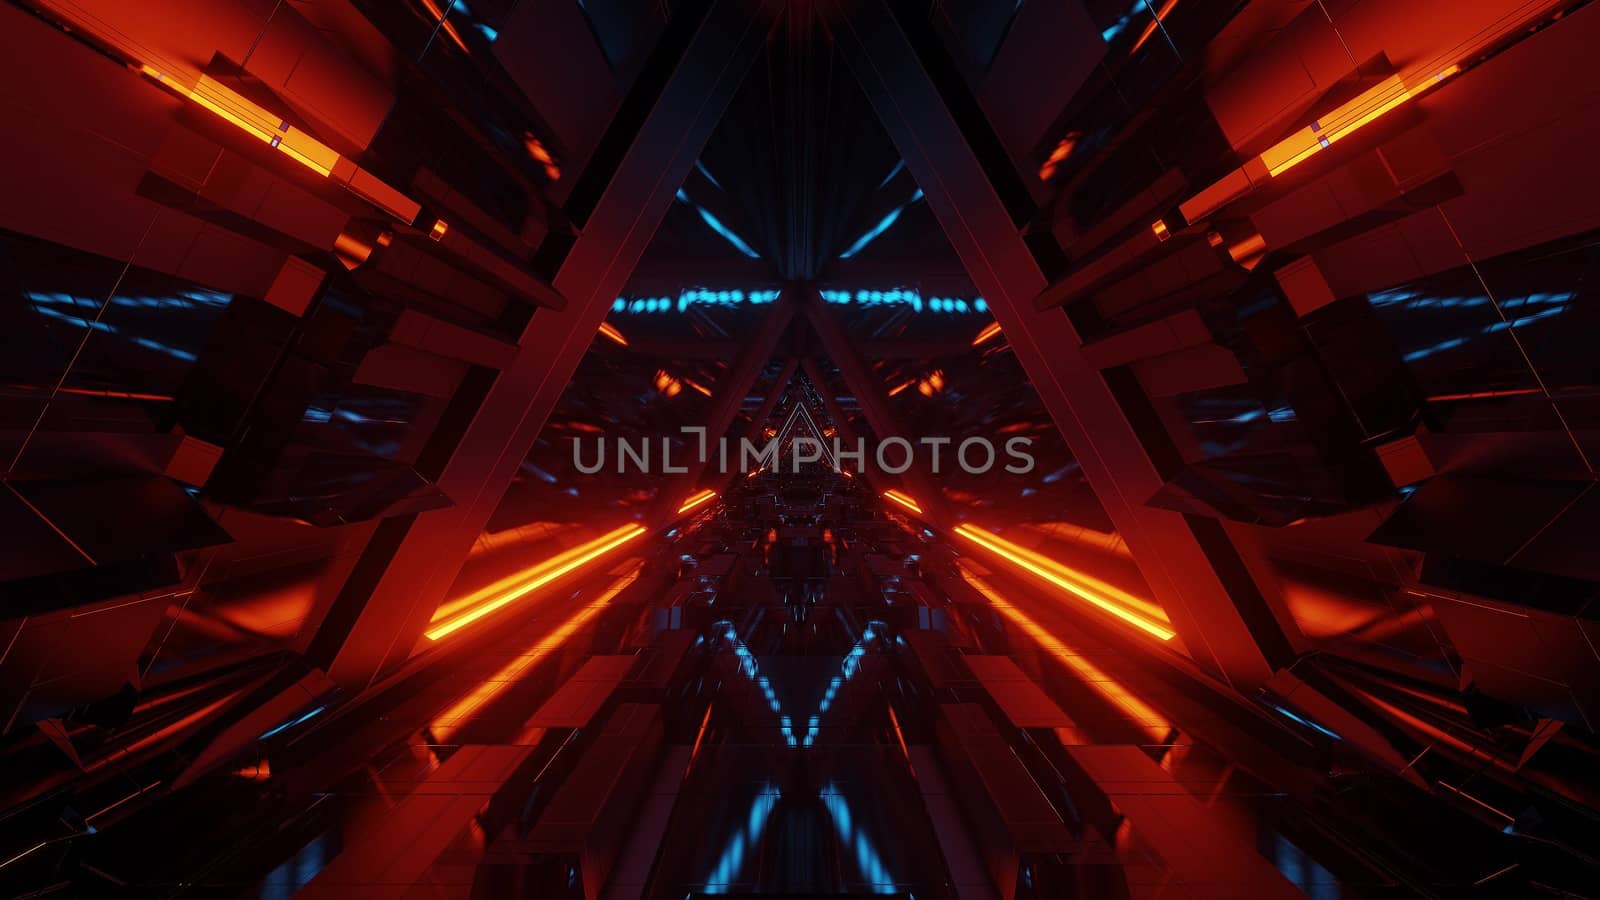 technical triangle space ship hangar tunnel corridor with glass windows 3d illustrations graphics artworks background wallpaper by tunnelmotions